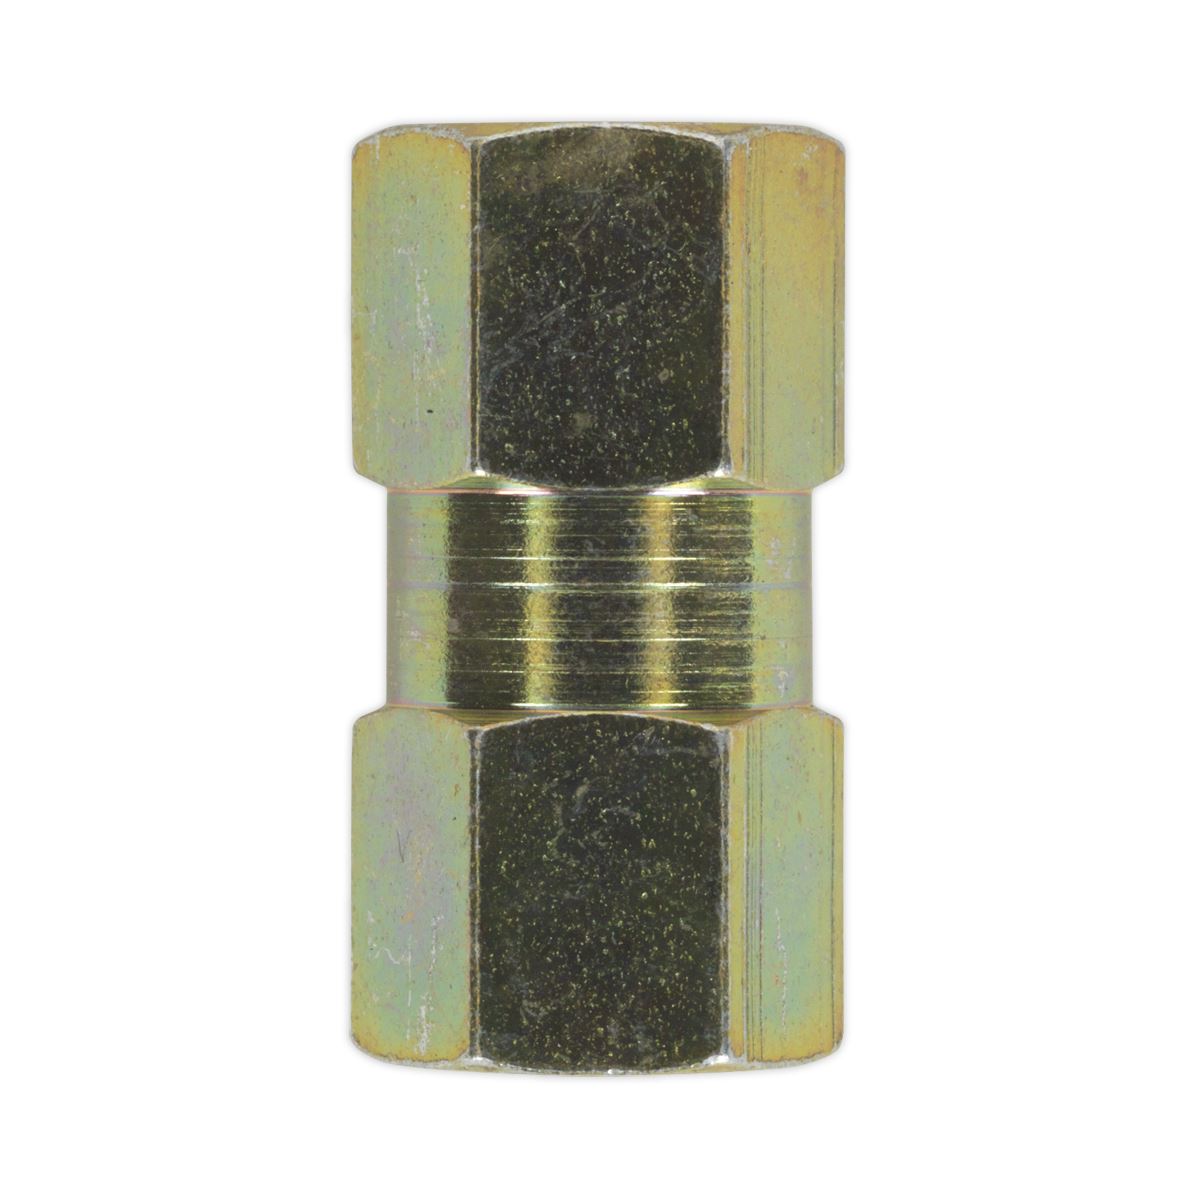 Sealey Brake Tube Connector M10 x 1mm Female to Female Pack of 10